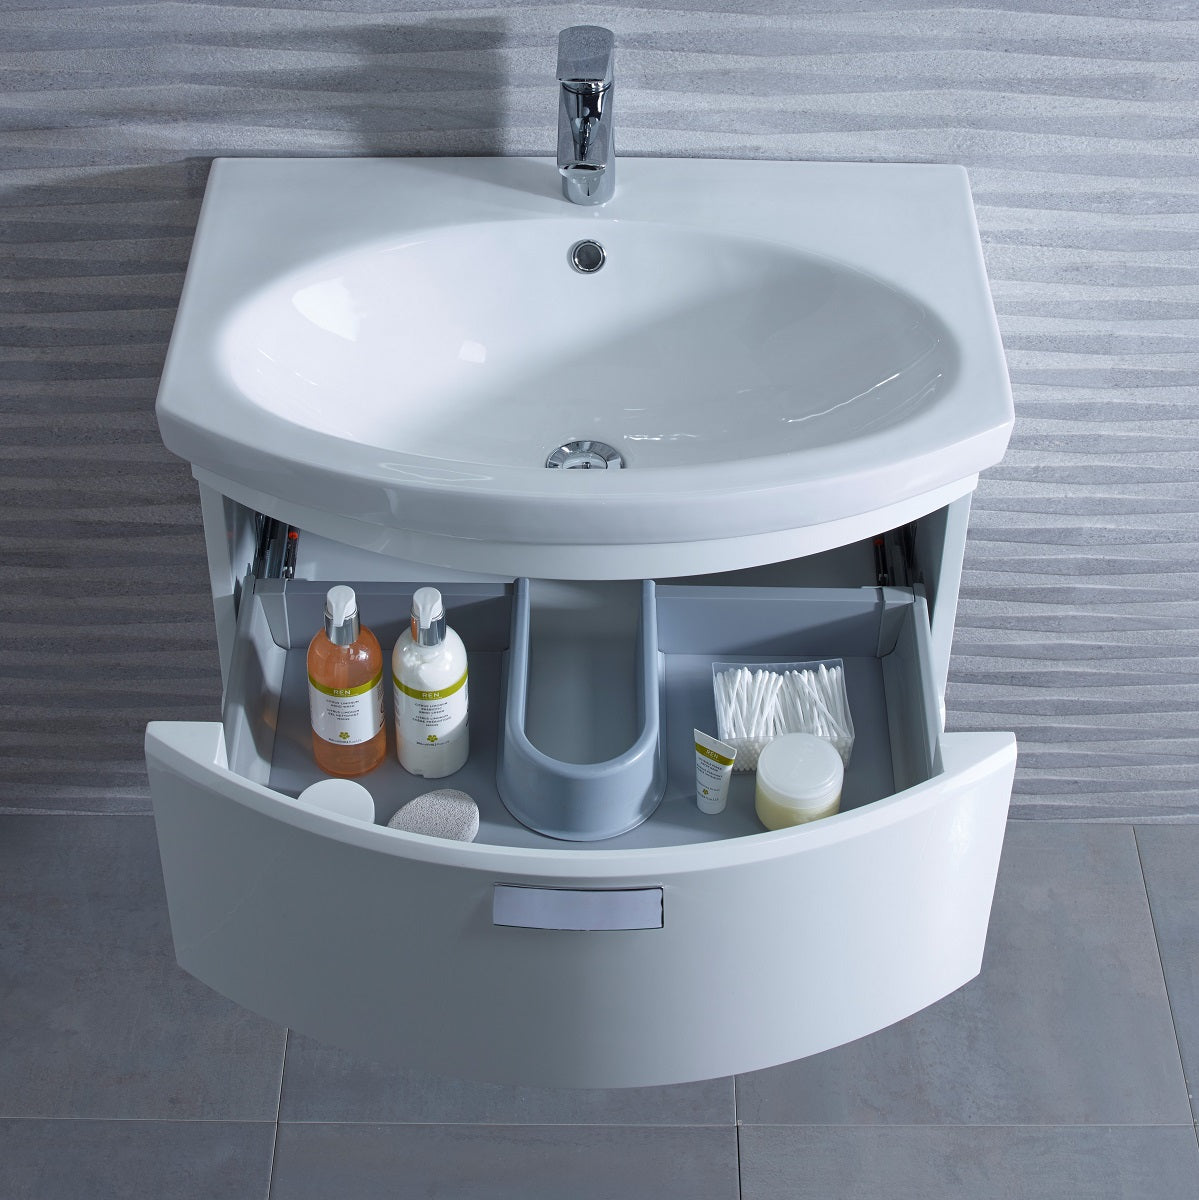 Tavistock Tempo 650mm Wall Mounted Unit &amp; Basin - Various Colours basin open shown by top view with stone wall design against the unit TE650WW